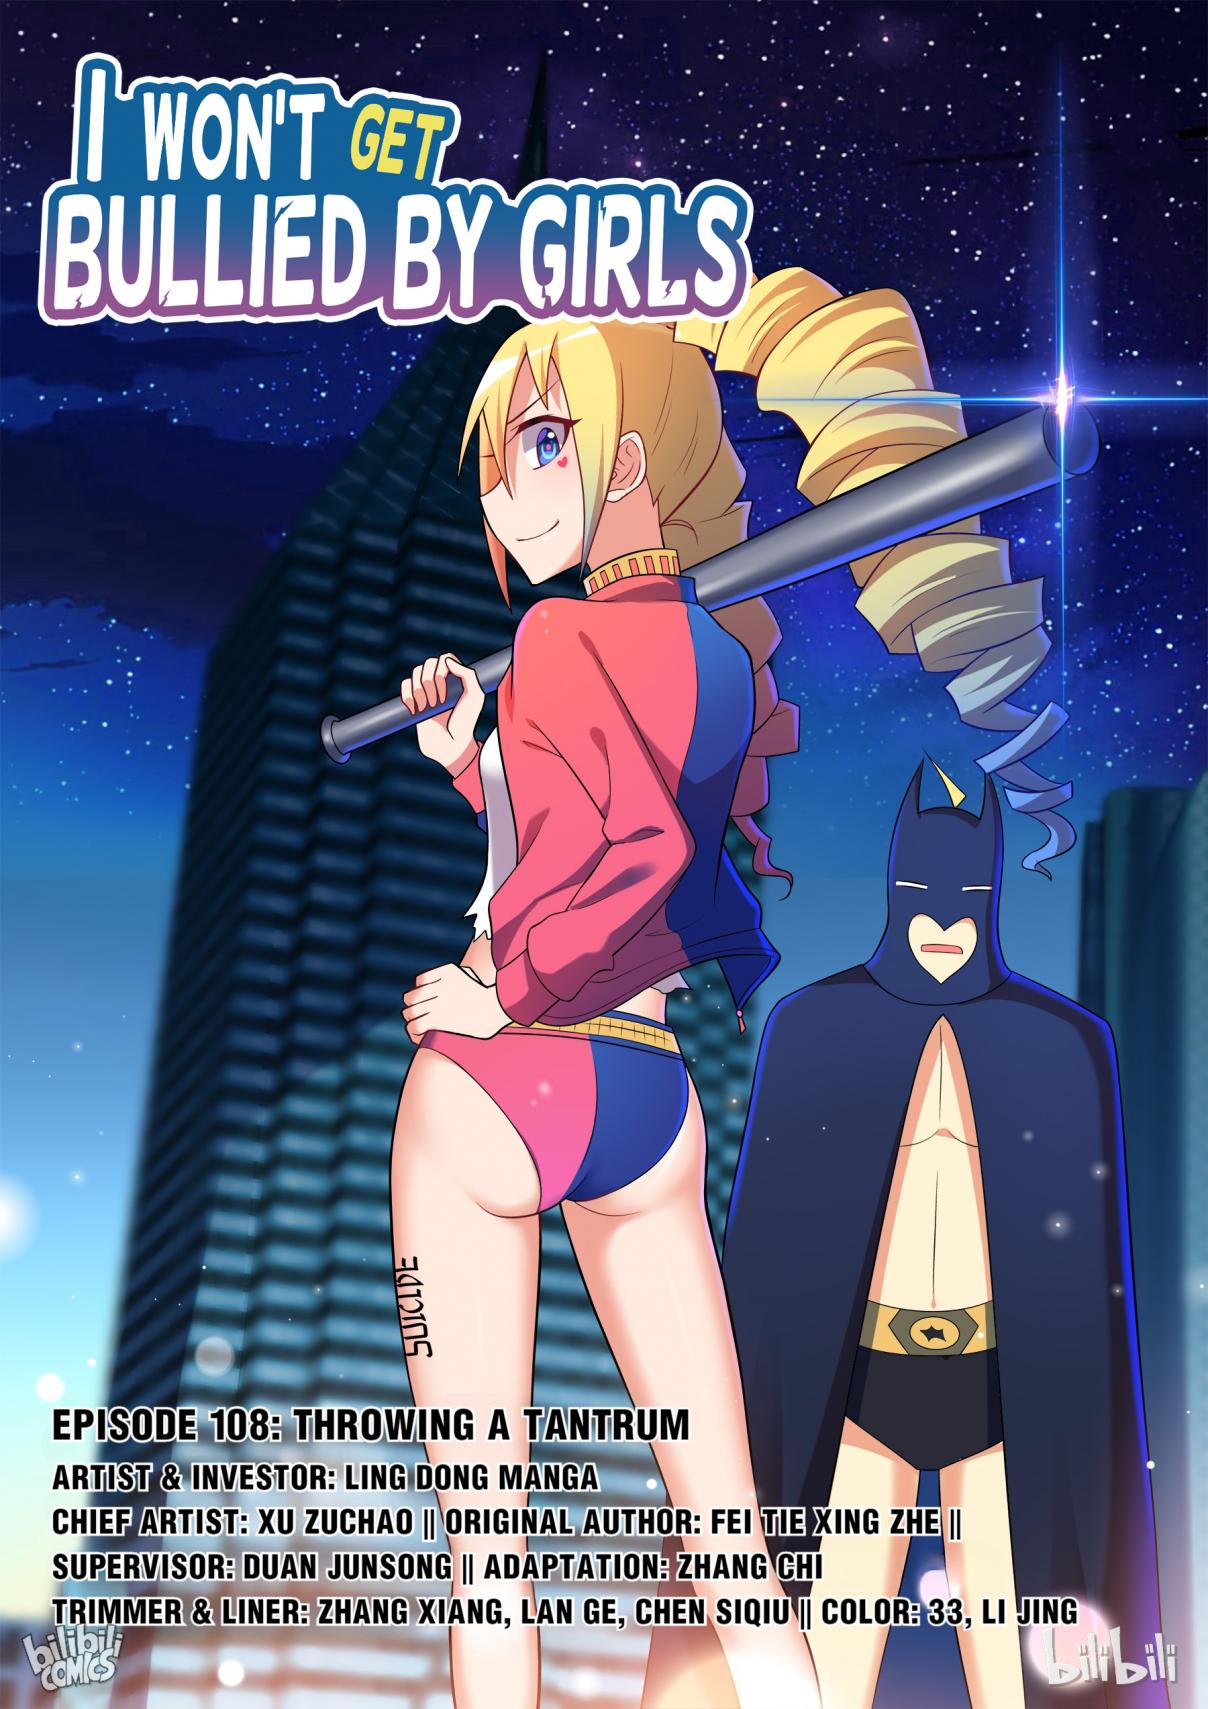 I Don't Want to Be Bullied by Girls 108